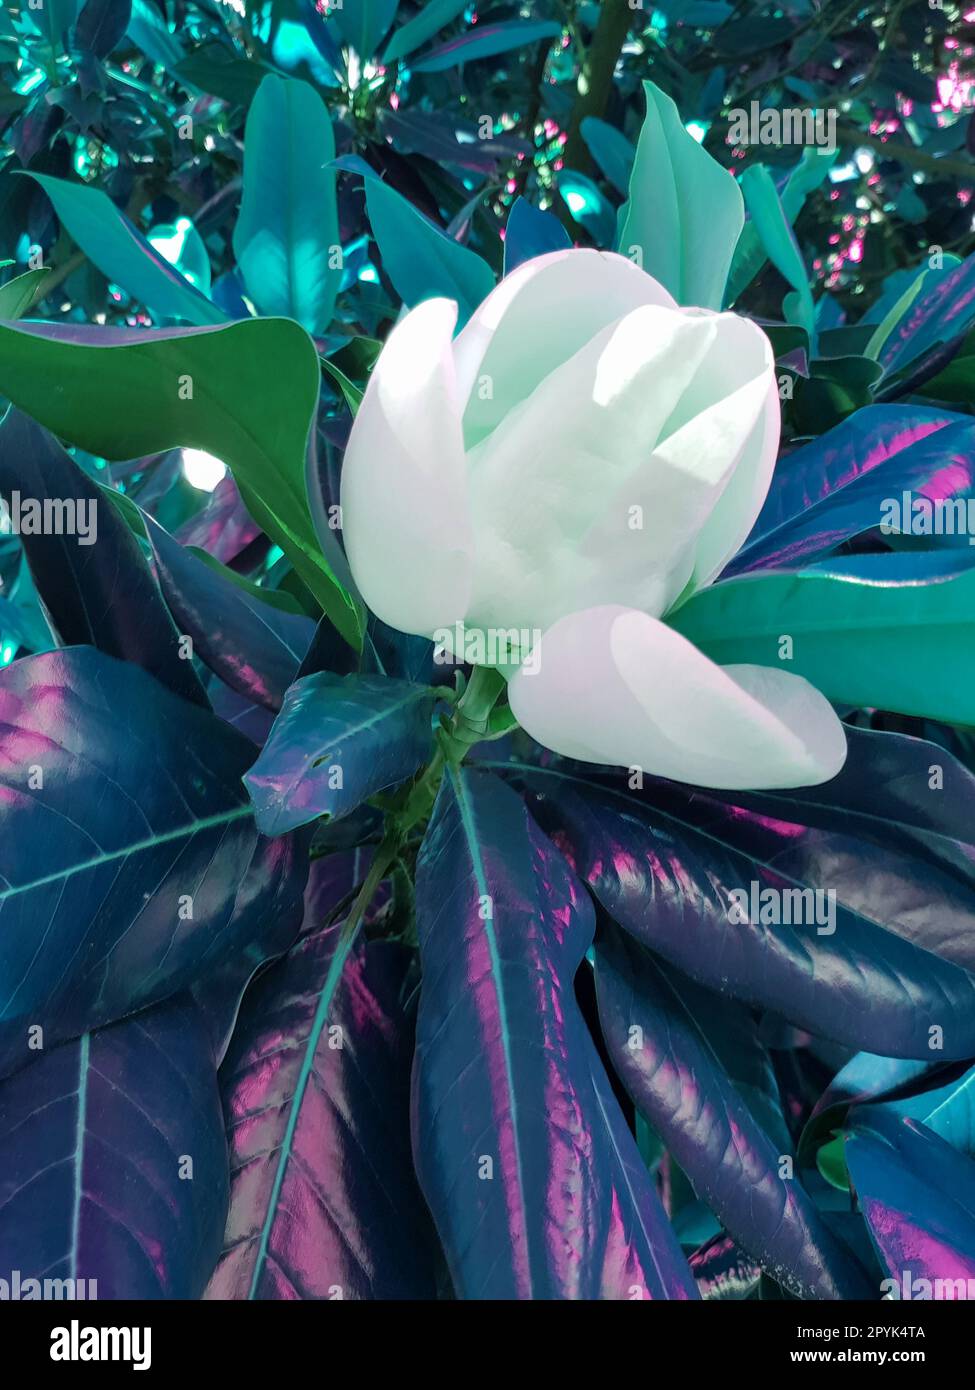 Green tinted, a large creamy-white southern magnolia flower is surrounded by glossy green tree leaves. White petal close-up, vertical Stock Photo